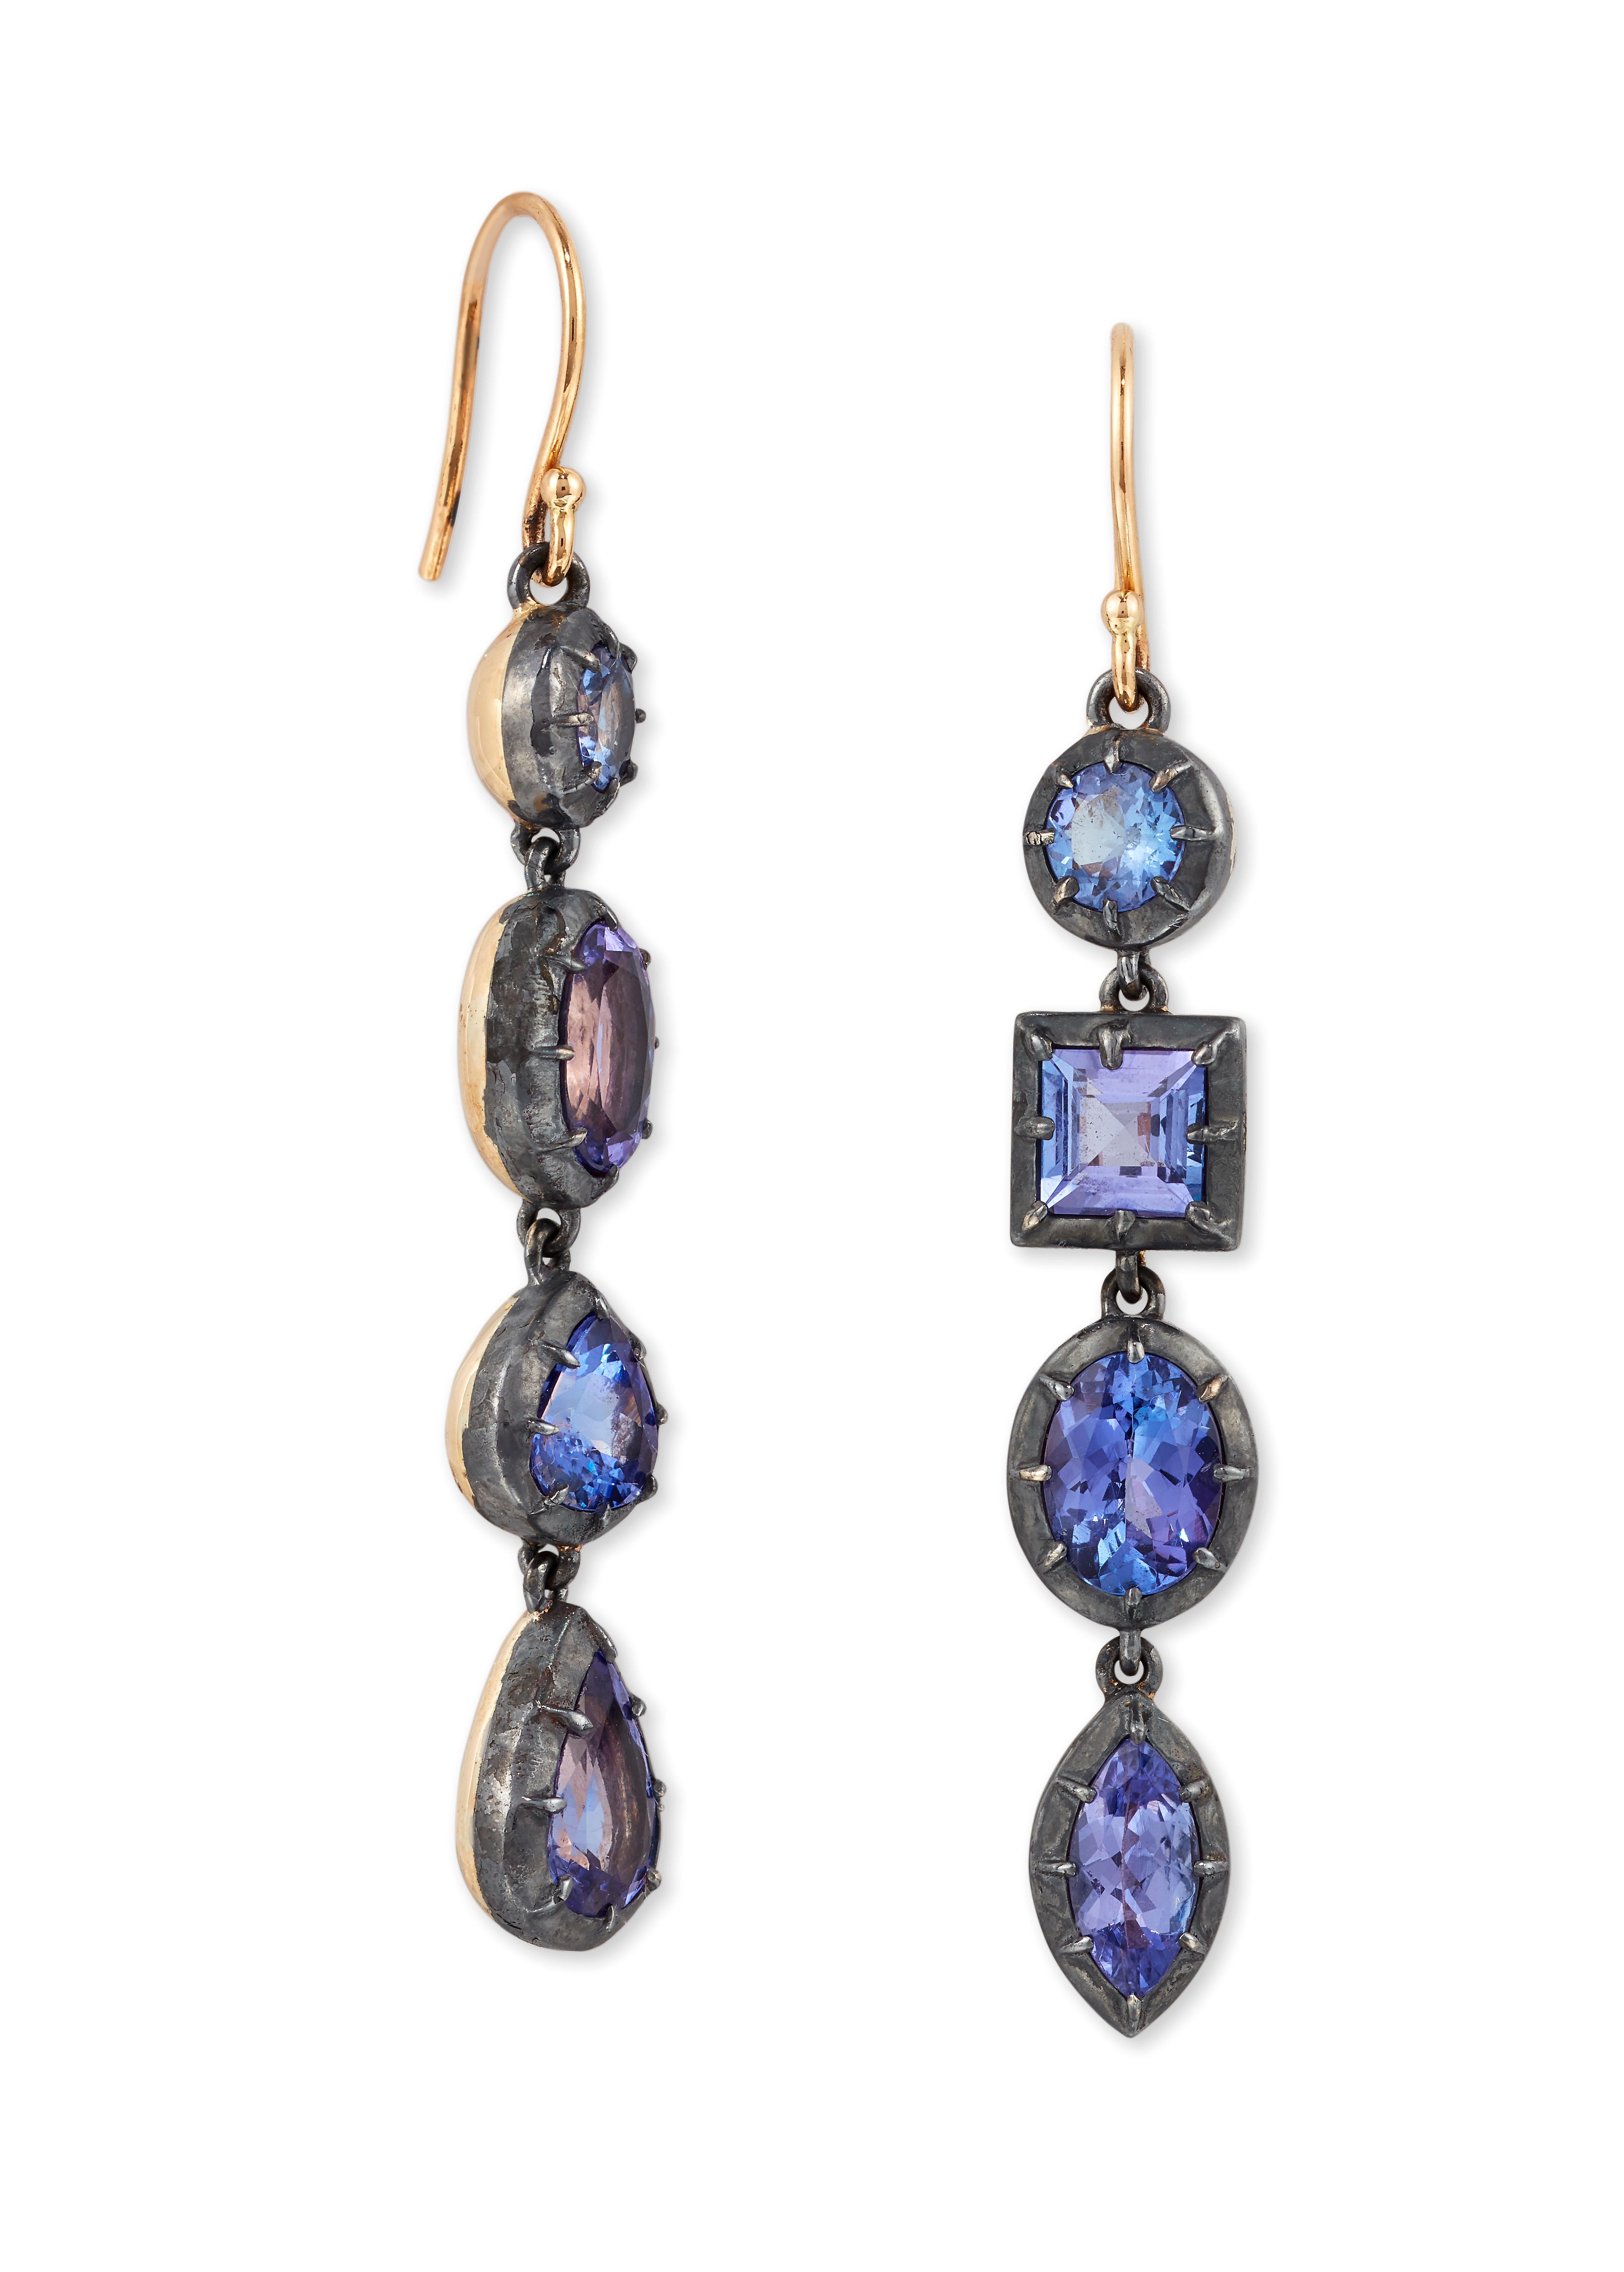 A Pair of Tanzanite Earrings, set with multi-Shapes.

Composed of a Line of collet set Oval, Square, Marquise and pear shape Tanzanite's, with hook fittings set in 18ct Yellow gold and Silver. 